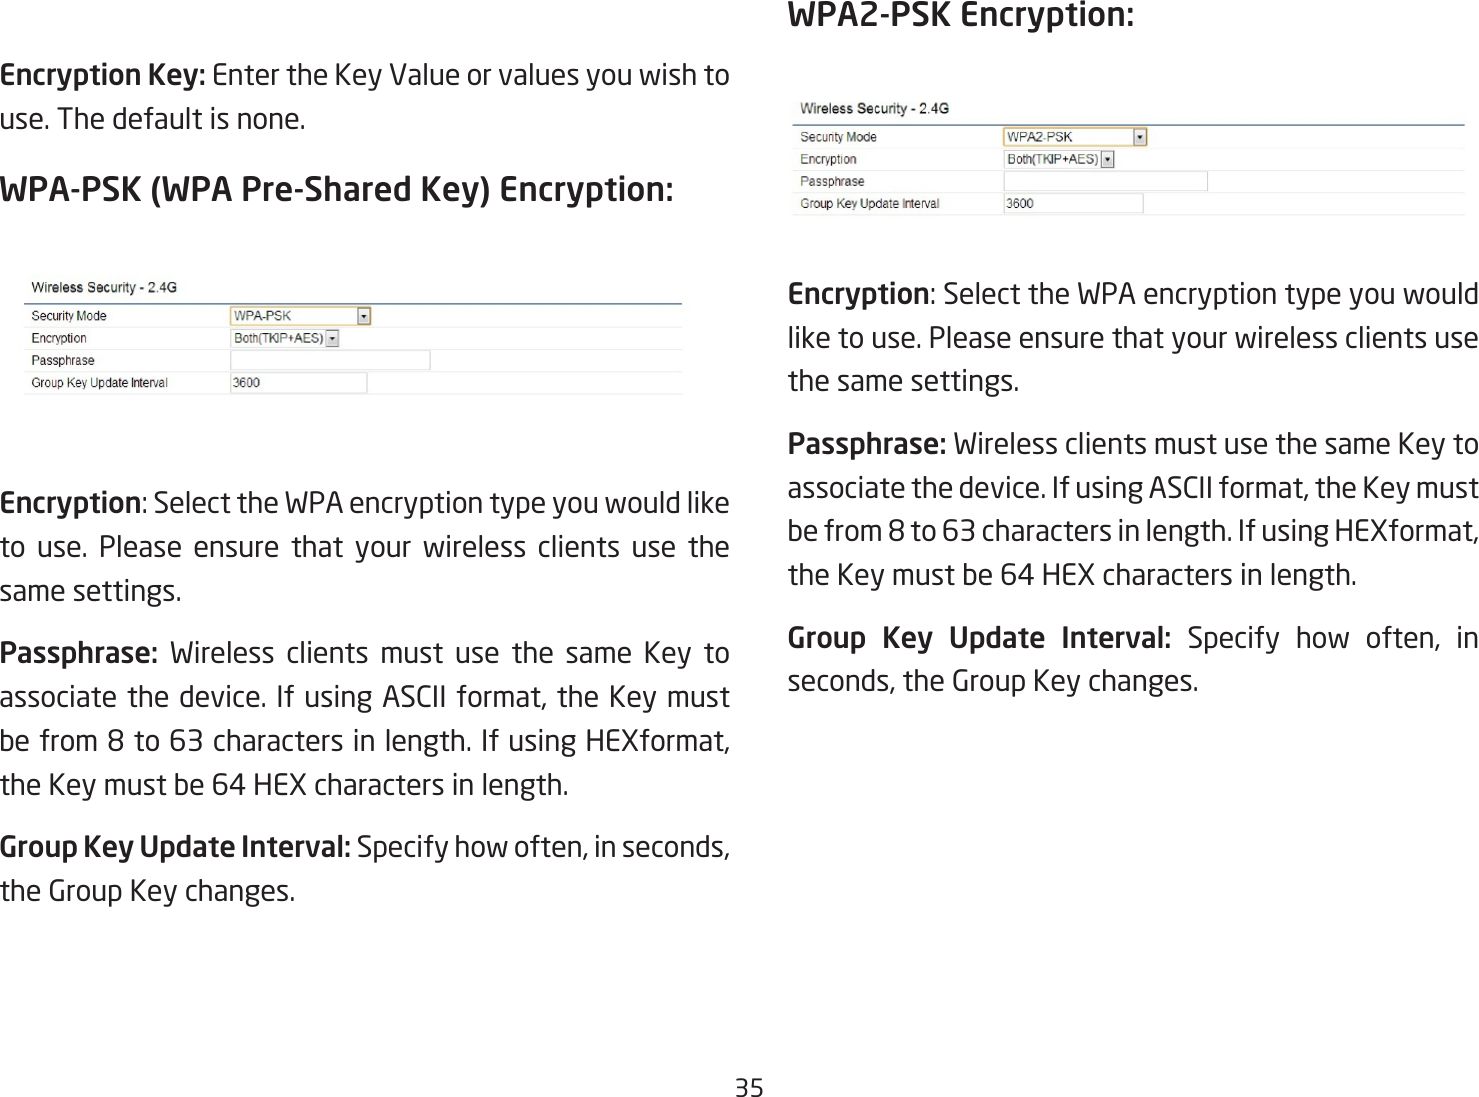 35Encryption Key: Enter the Key Value or values you wish to use. The default is none.WPA-PSK (WPA Pre-Shared Key) Encryption:Encryption:SelecttheWPAencryptiontypeyouwouldliketo use. Please ensure that your wireless clients use the same settings.Passphrase:  Wireless clients must use the same Key to associatethedevice.IfusingASCIIformat,theKeymustbefrom8to63charactersinlength.IfusingHEXformat,theKeymustbe64HEXcharactersinlength.Group Key Update Interval: Specifyhowoften,inseconds,the Group Key changes. WPA2-PSK Encryption: Encryption:SelecttheWPAencryptiontypeyouwouldlike to use. Please ensure that your wireless clients use the same settings.Passphrase: Wireless clients must use the same Key to associatethedevice.IfusingASCIIformat,theKeymustbefrom8to63charactersinlength.IfusingHEXformat,theKeymustbe64HEXcharactersinlength.Group  Key  Update  Interval:  Specify how often, inseconds,theGroupKeychanges.